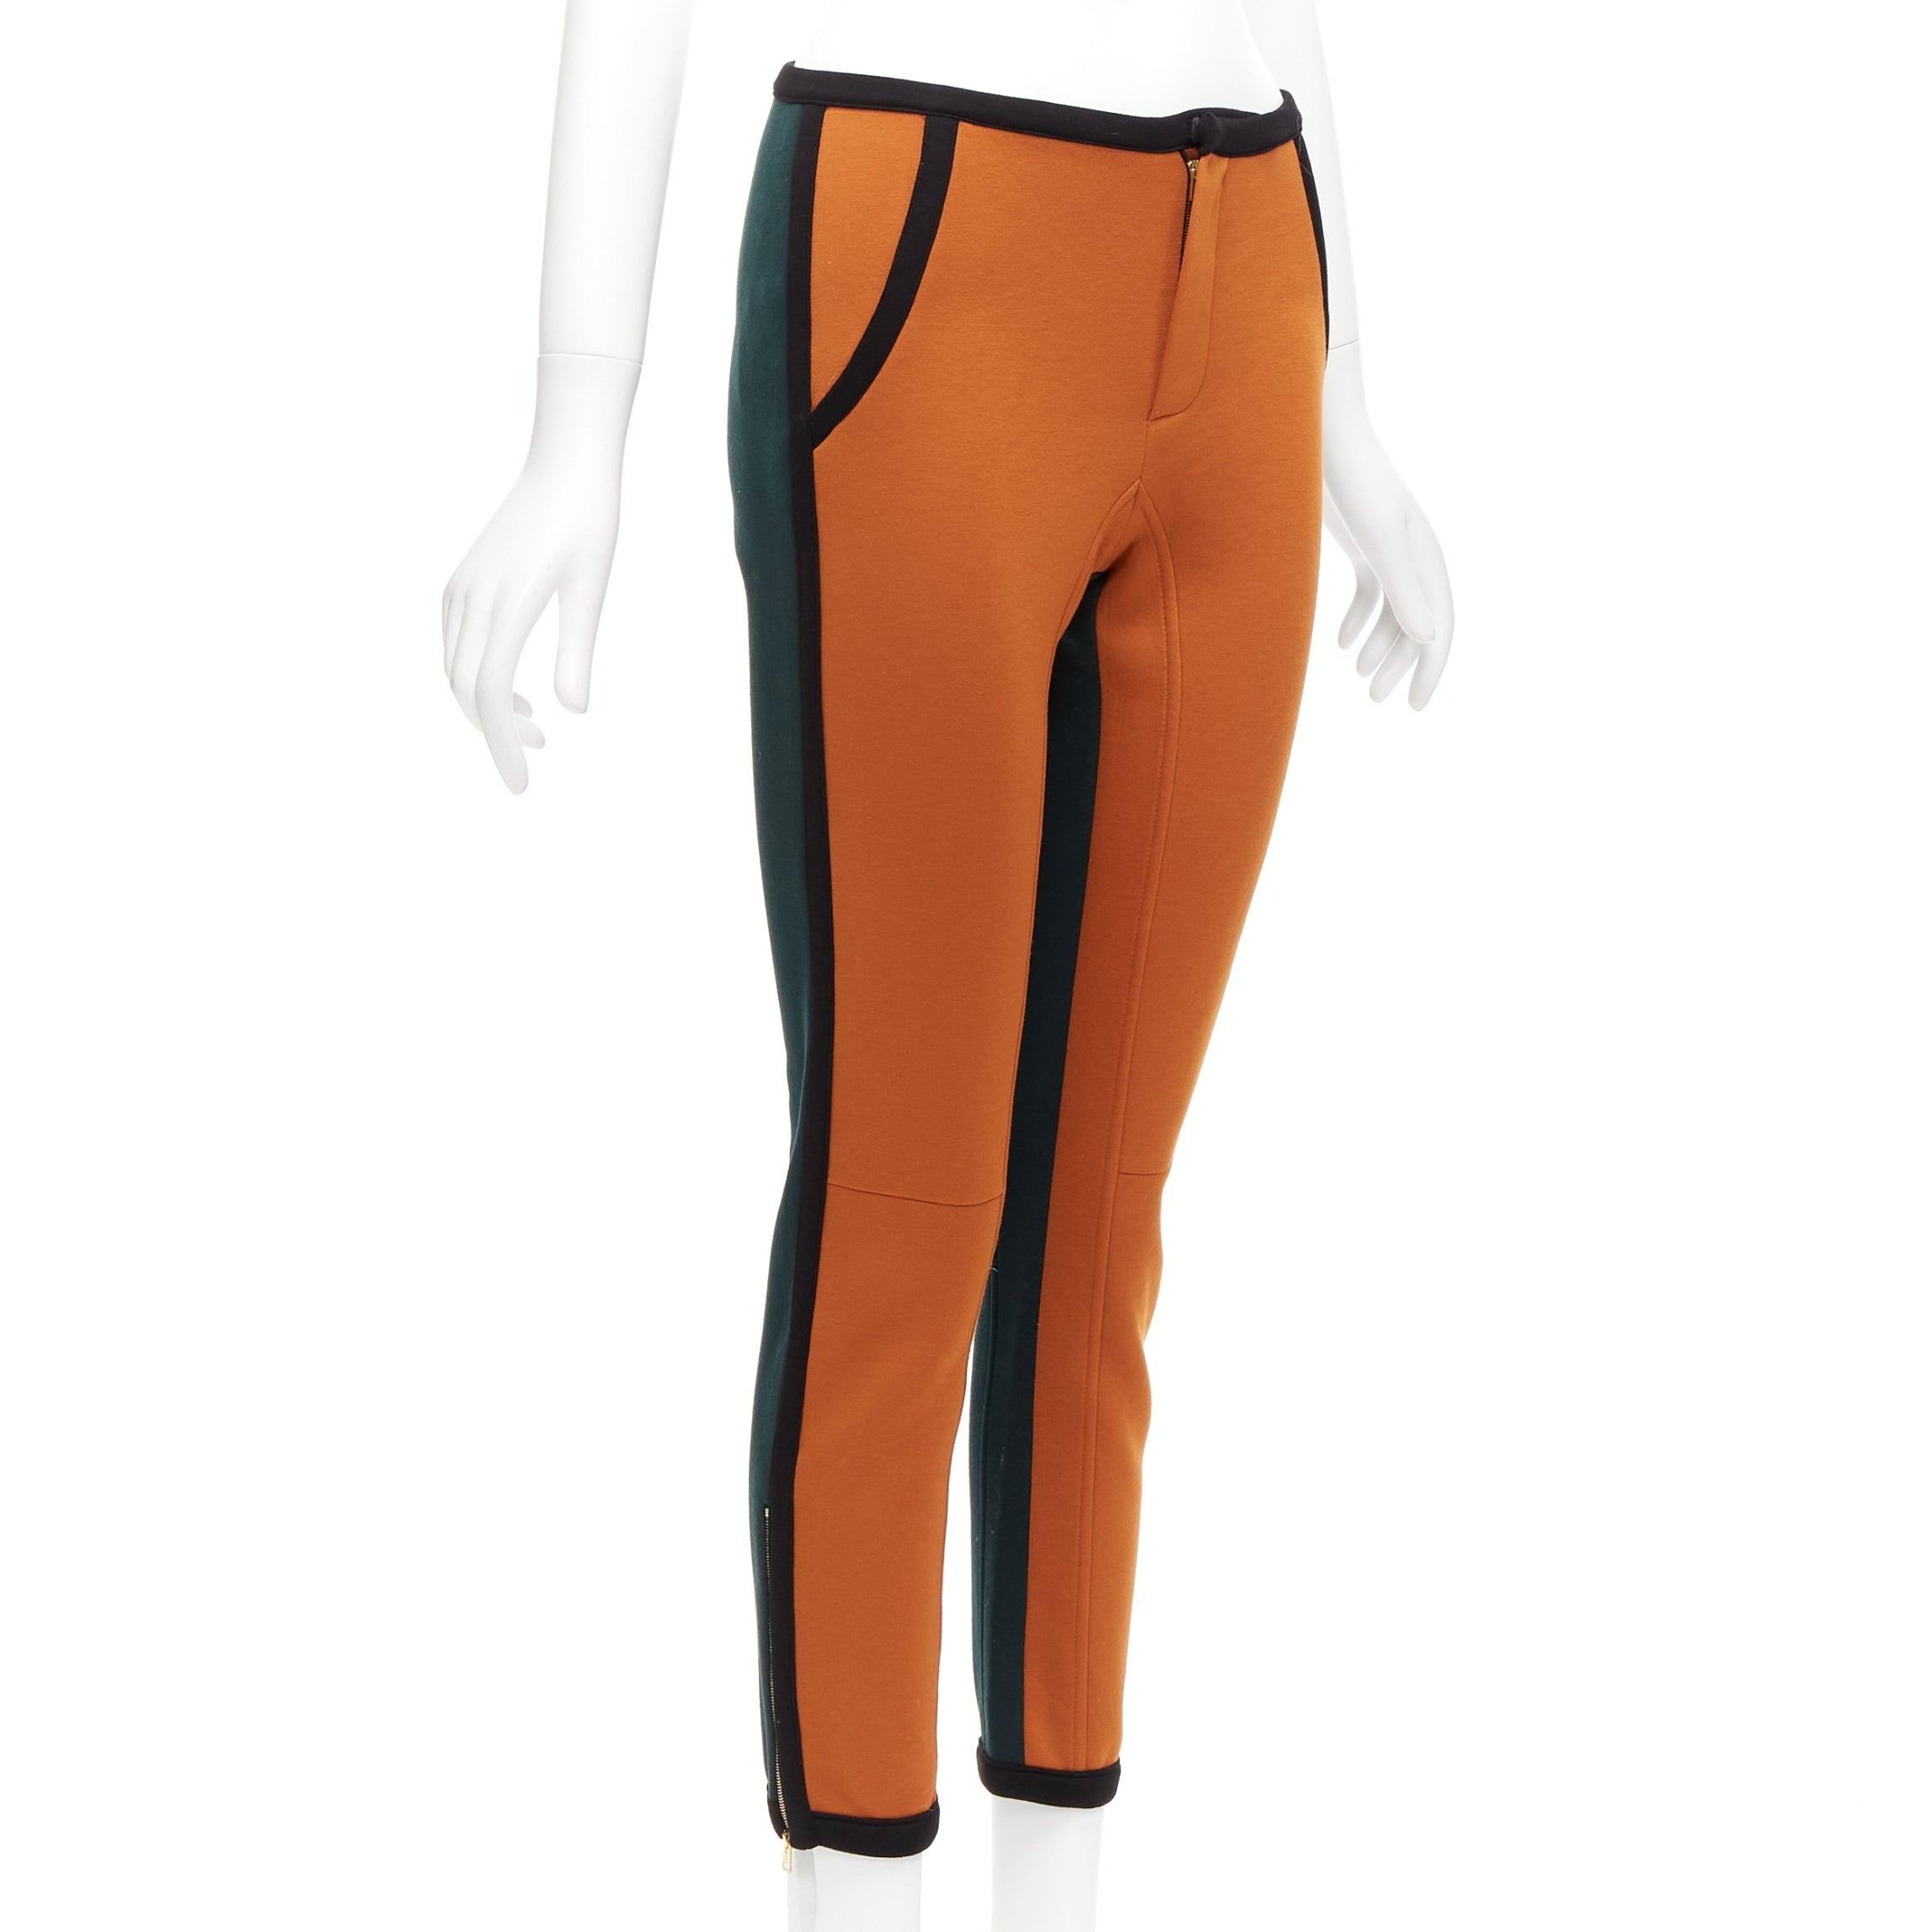 MARNI orange green colorblock black piping jogger pants IT38 XS
Reference: NKLL/A00071
Brand: Marni
Material: Viscose
Color: Orange, Green
Pattern: Solid
Closure: Zip Fly
Extra Details: Side zips at hems.
Made in: Italy

CONDITION:
Condition: Very